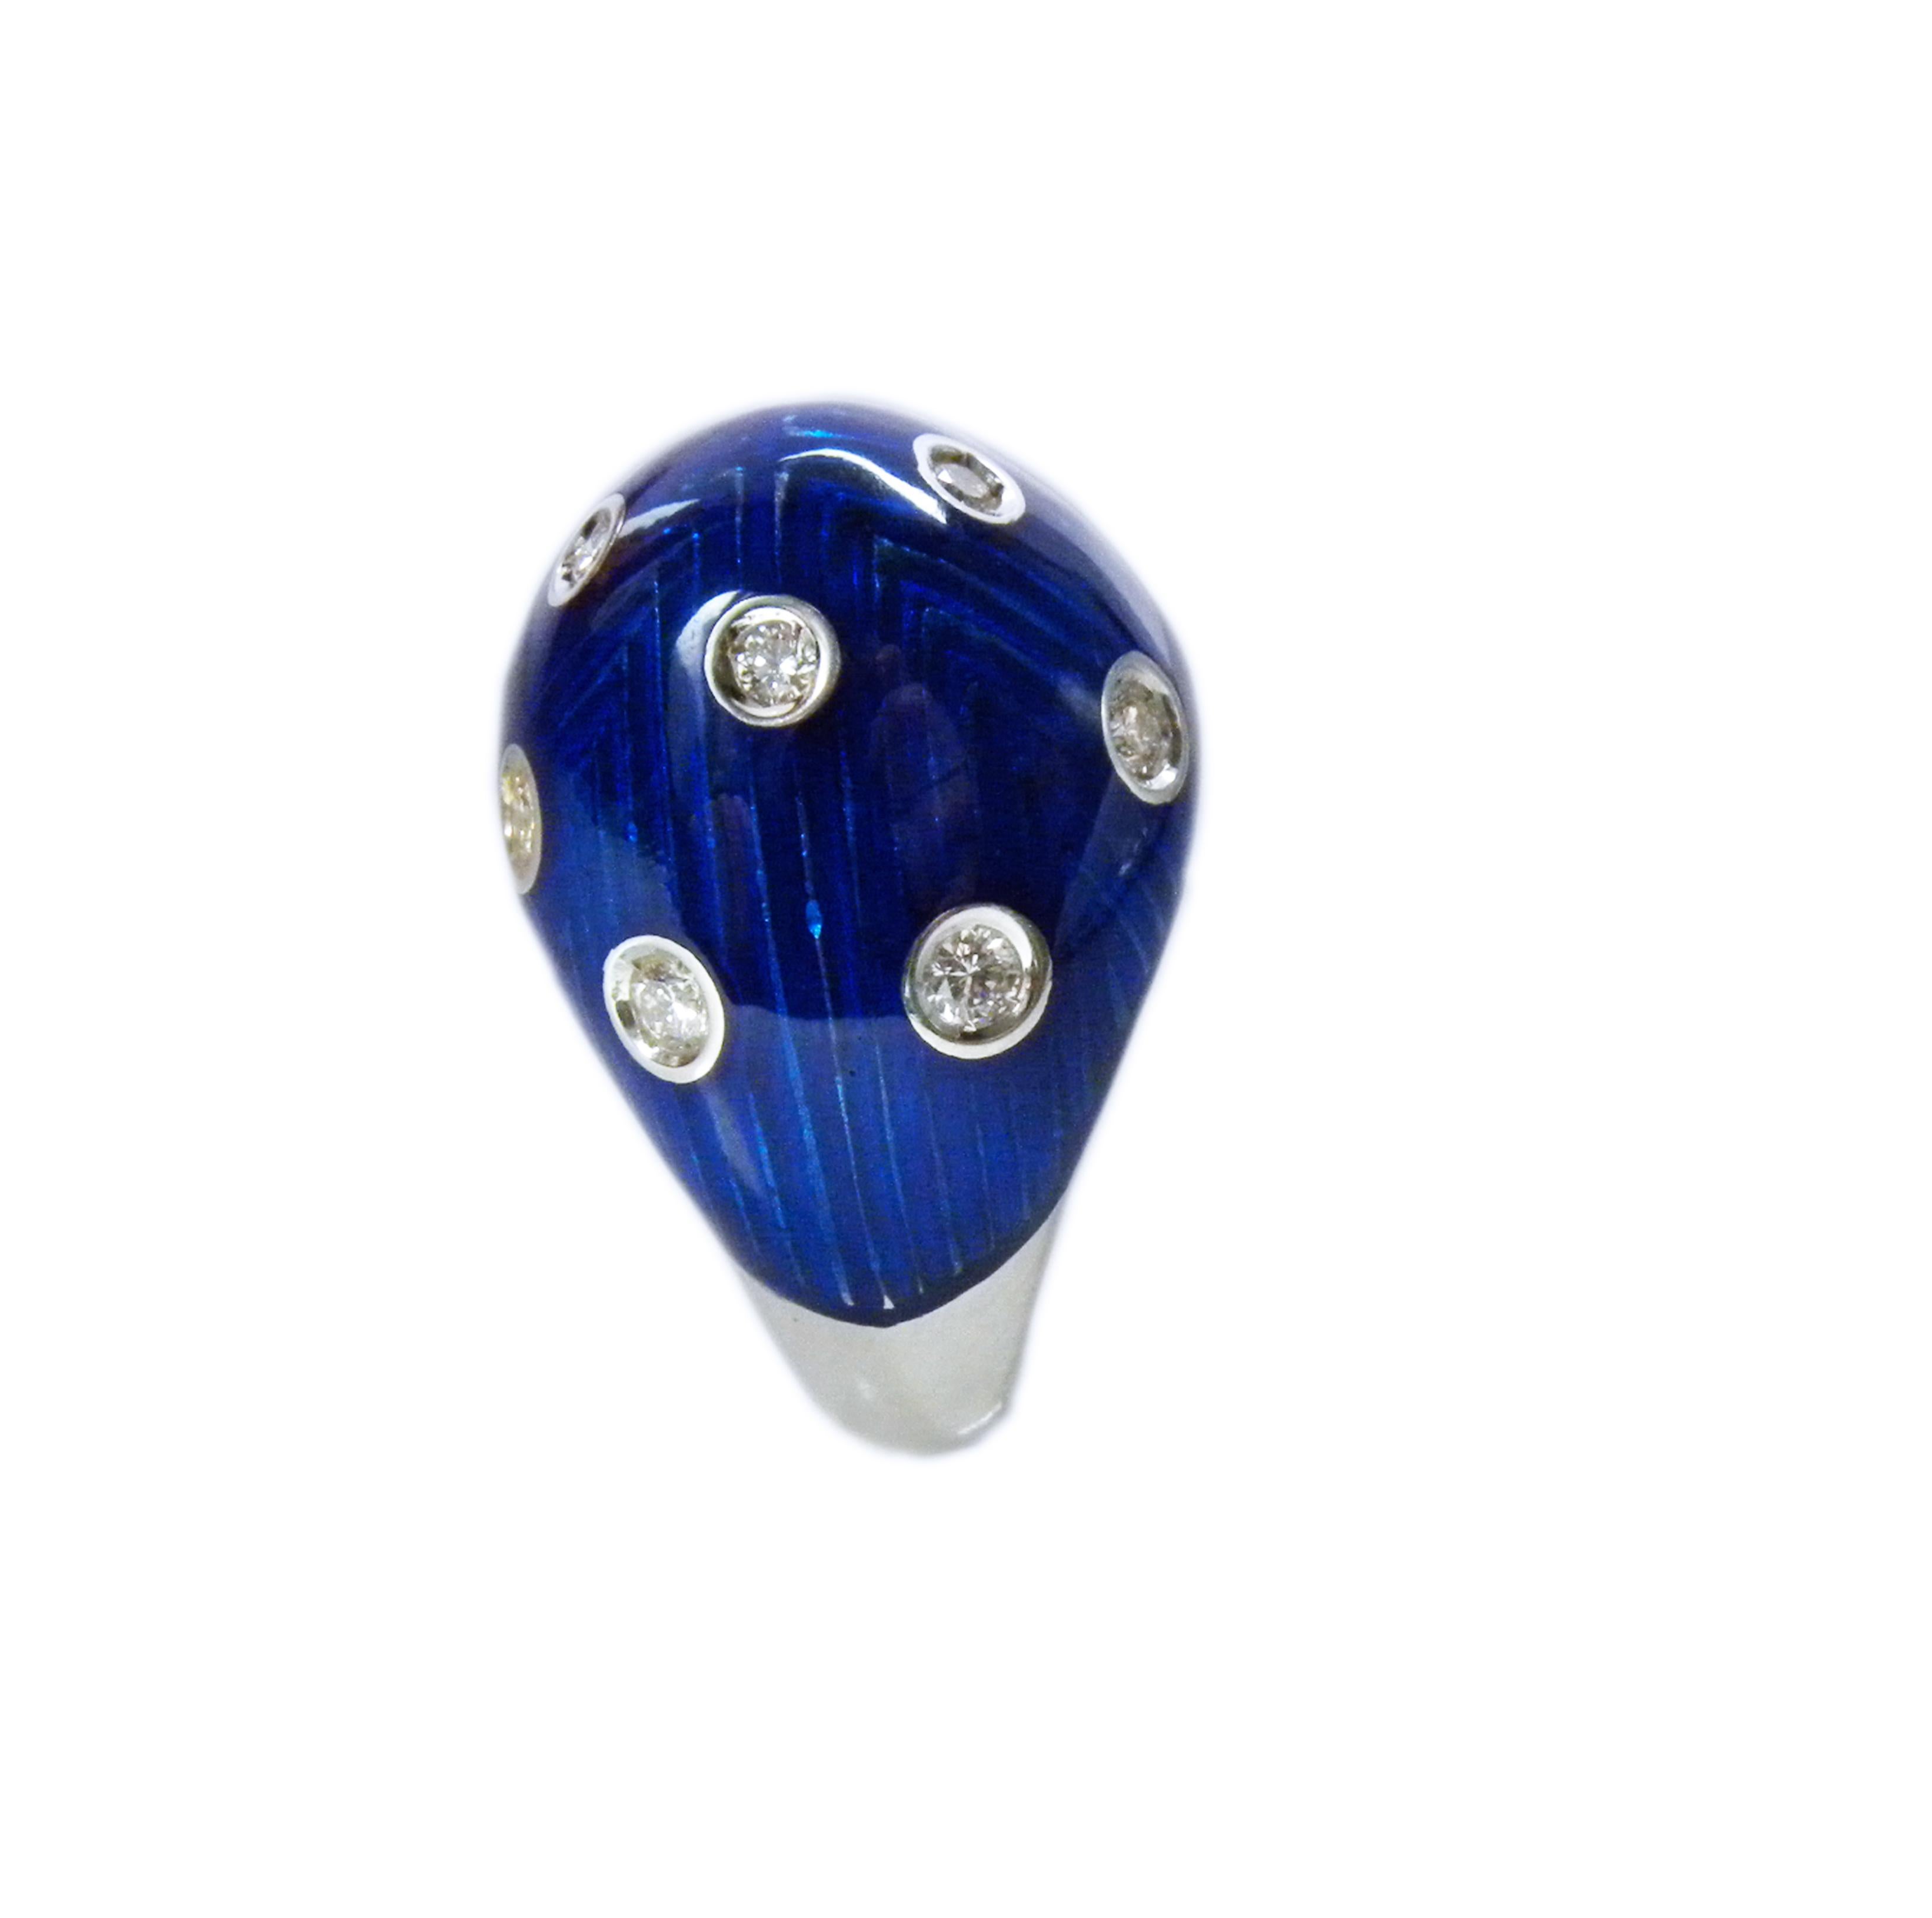 Brilliant Cut Berca 1950 Royal Blue Hand Enameled Egg Shaped White Diamond Cocktail Dome Ring For Sale